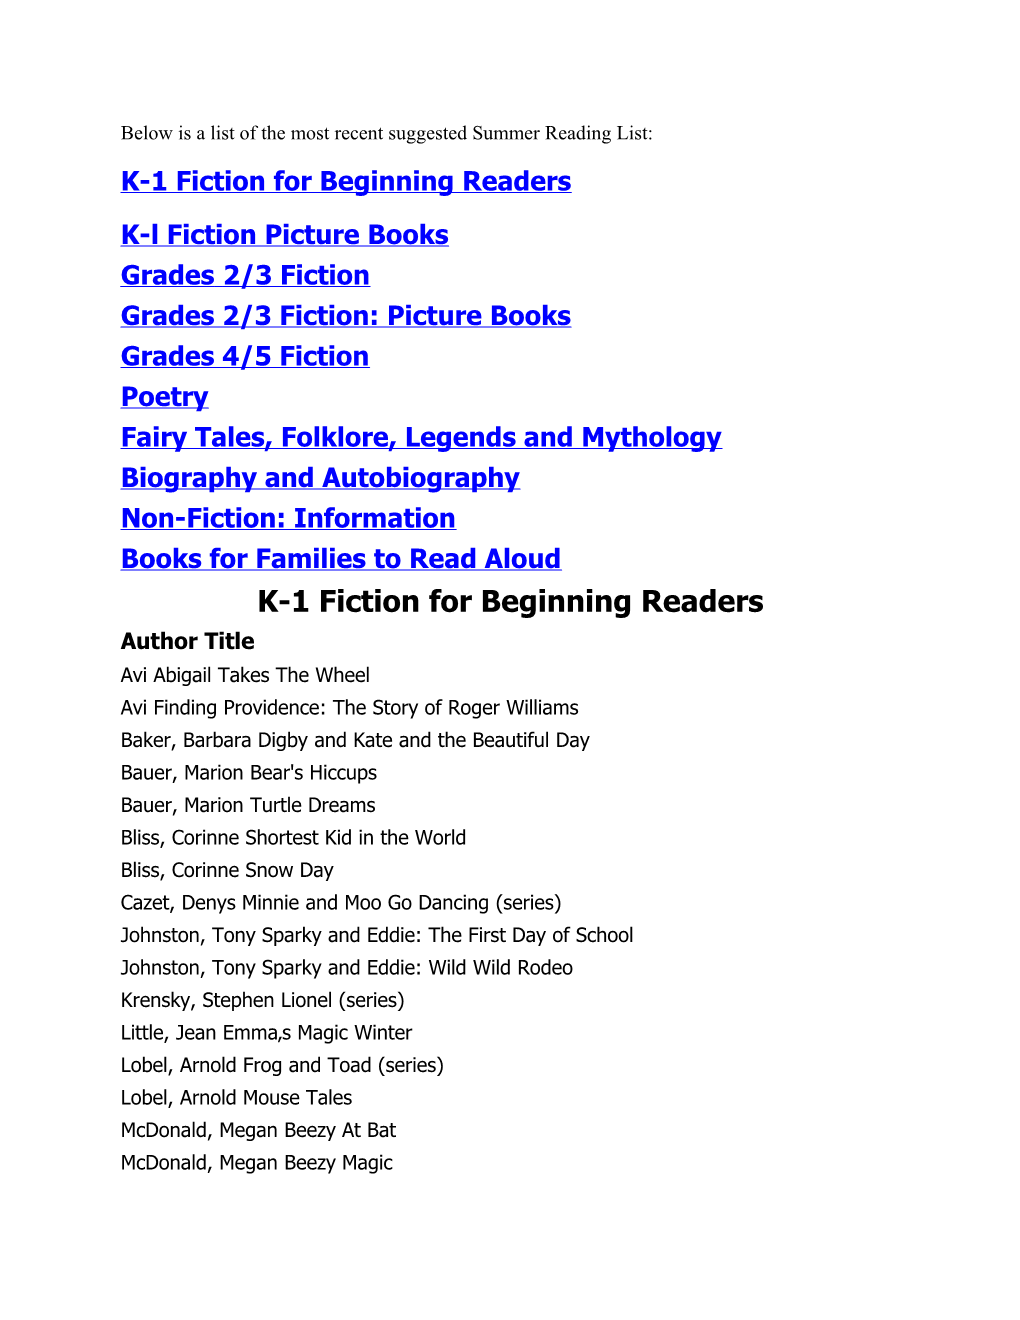 Below Is a List of the Most Recent Suggested Summer Reading List